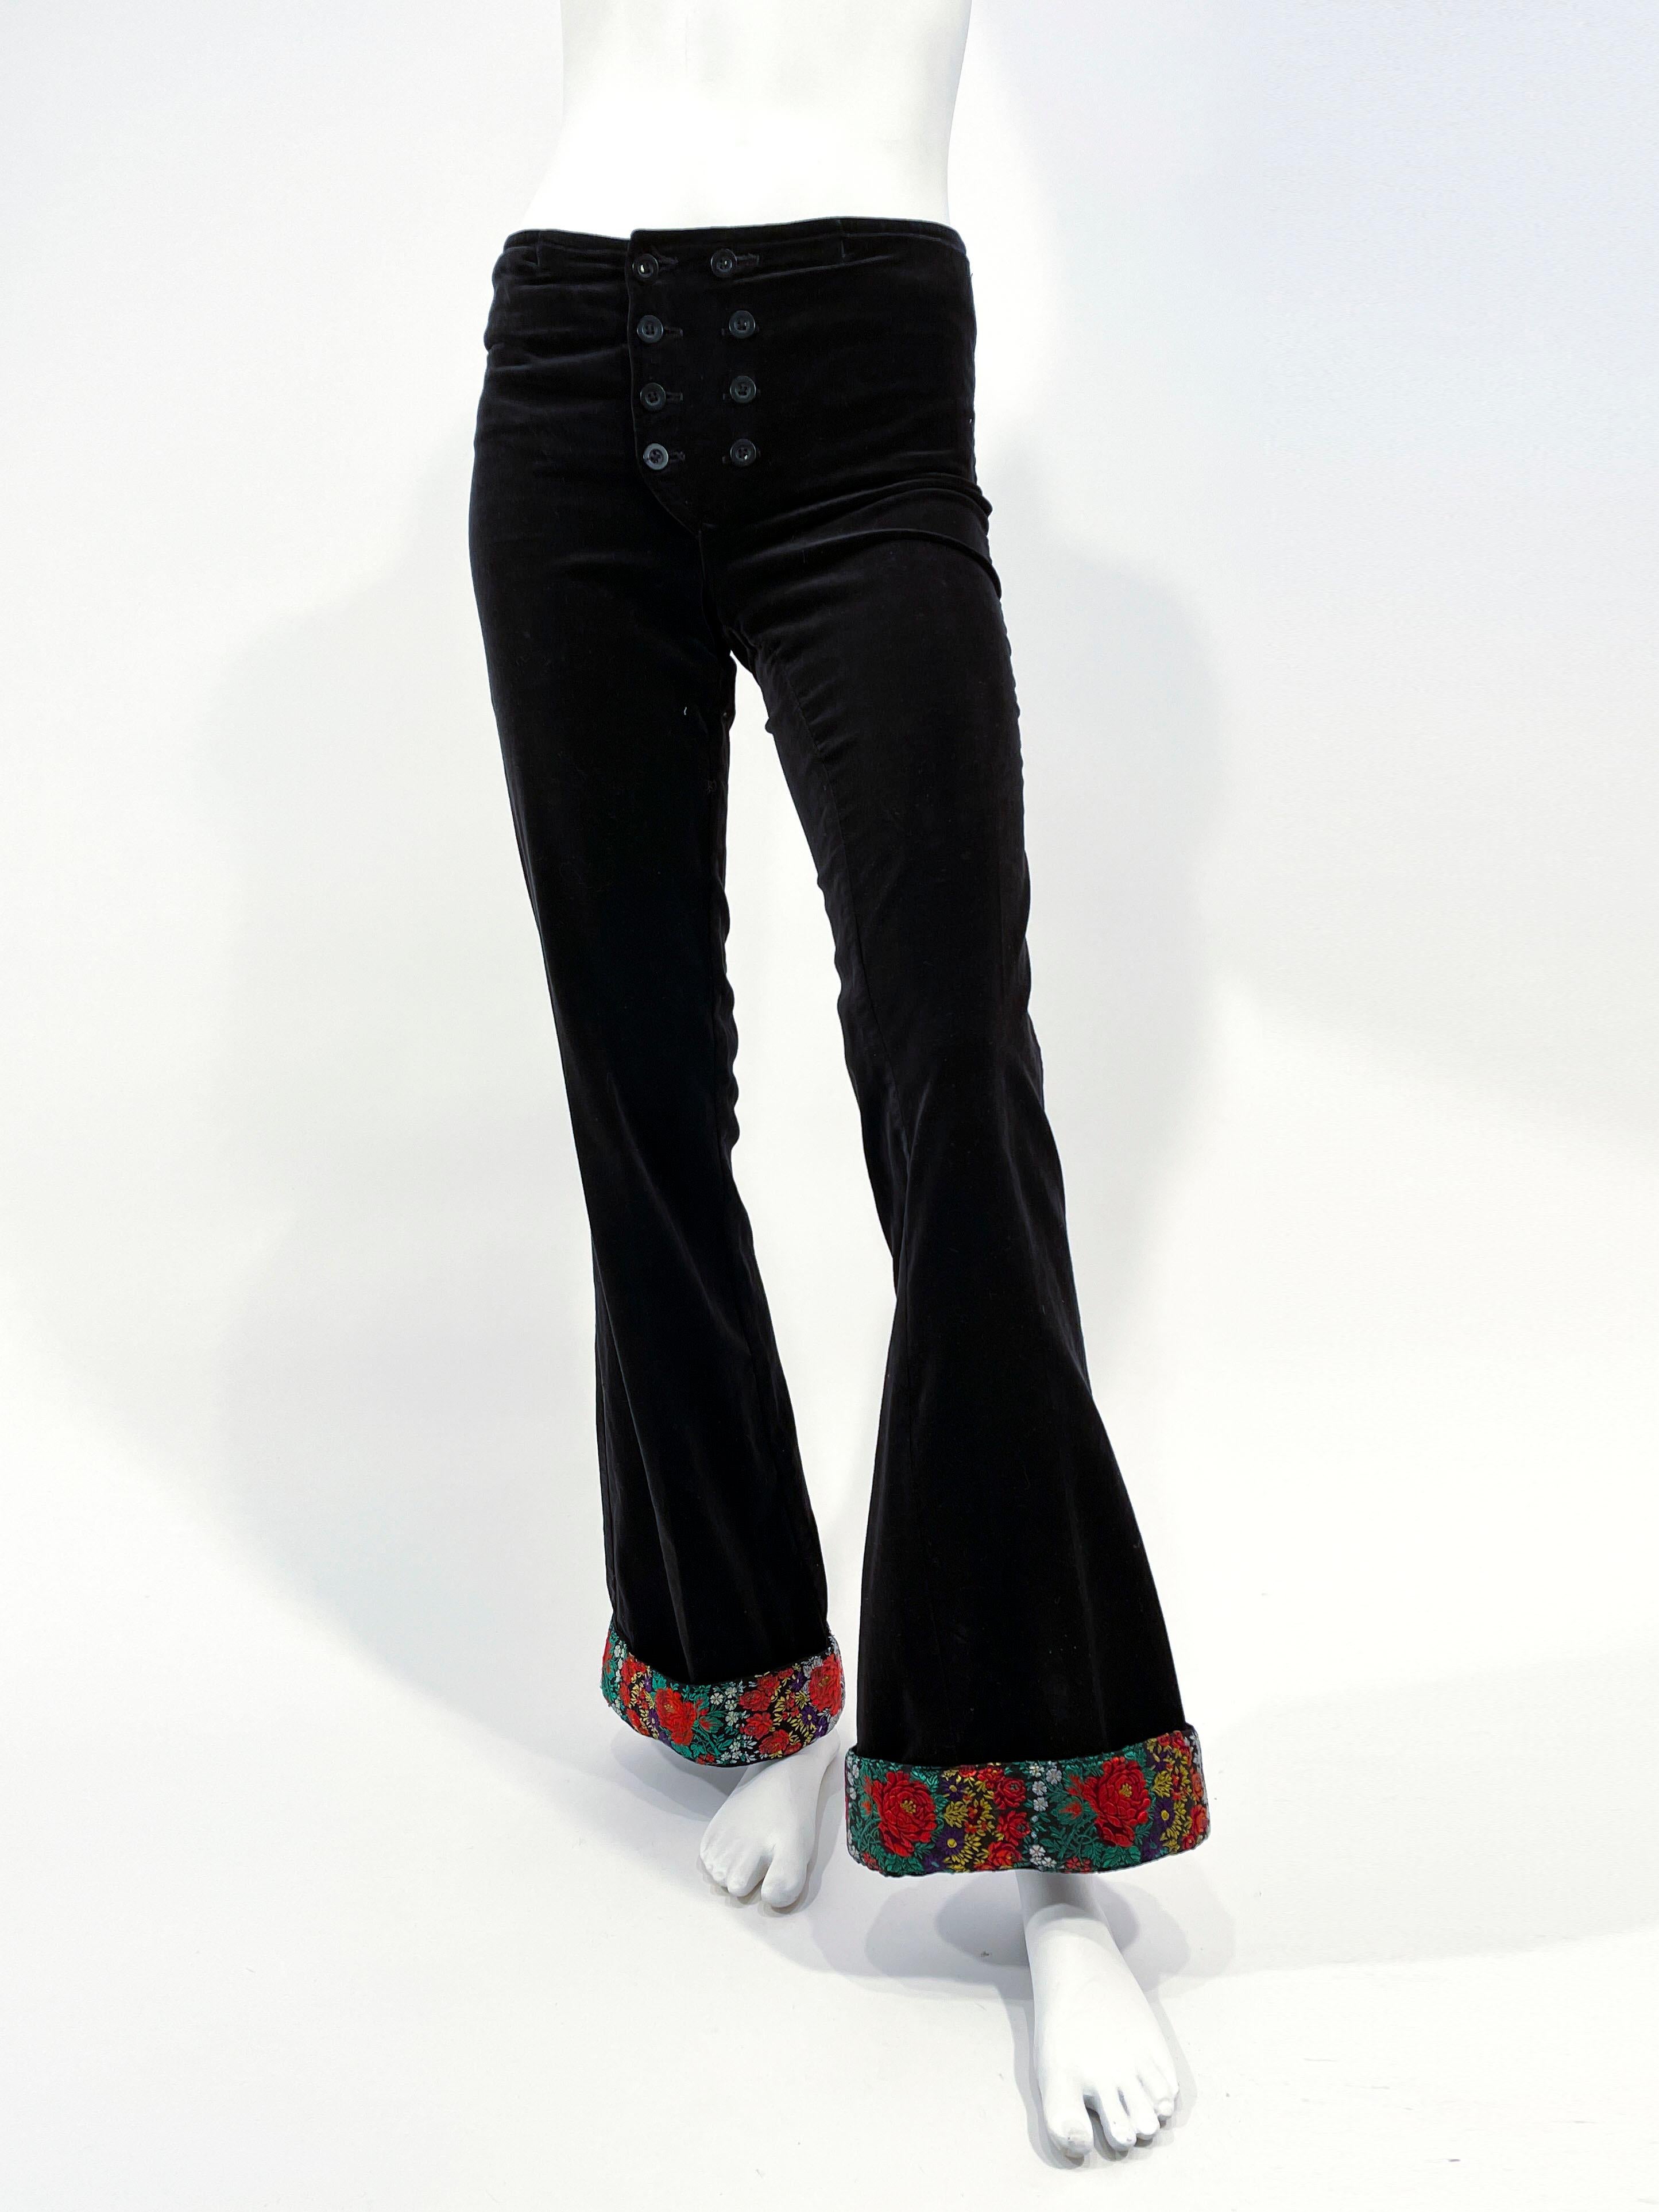 1970s custom made black velvet bellbottom pants with a double button fly on its low-rise hip hugger waist. The wide rolled cuffs on the bellbottom are finished with a vibrant multicolored floral trim. These pants are unlined with two pockets on the